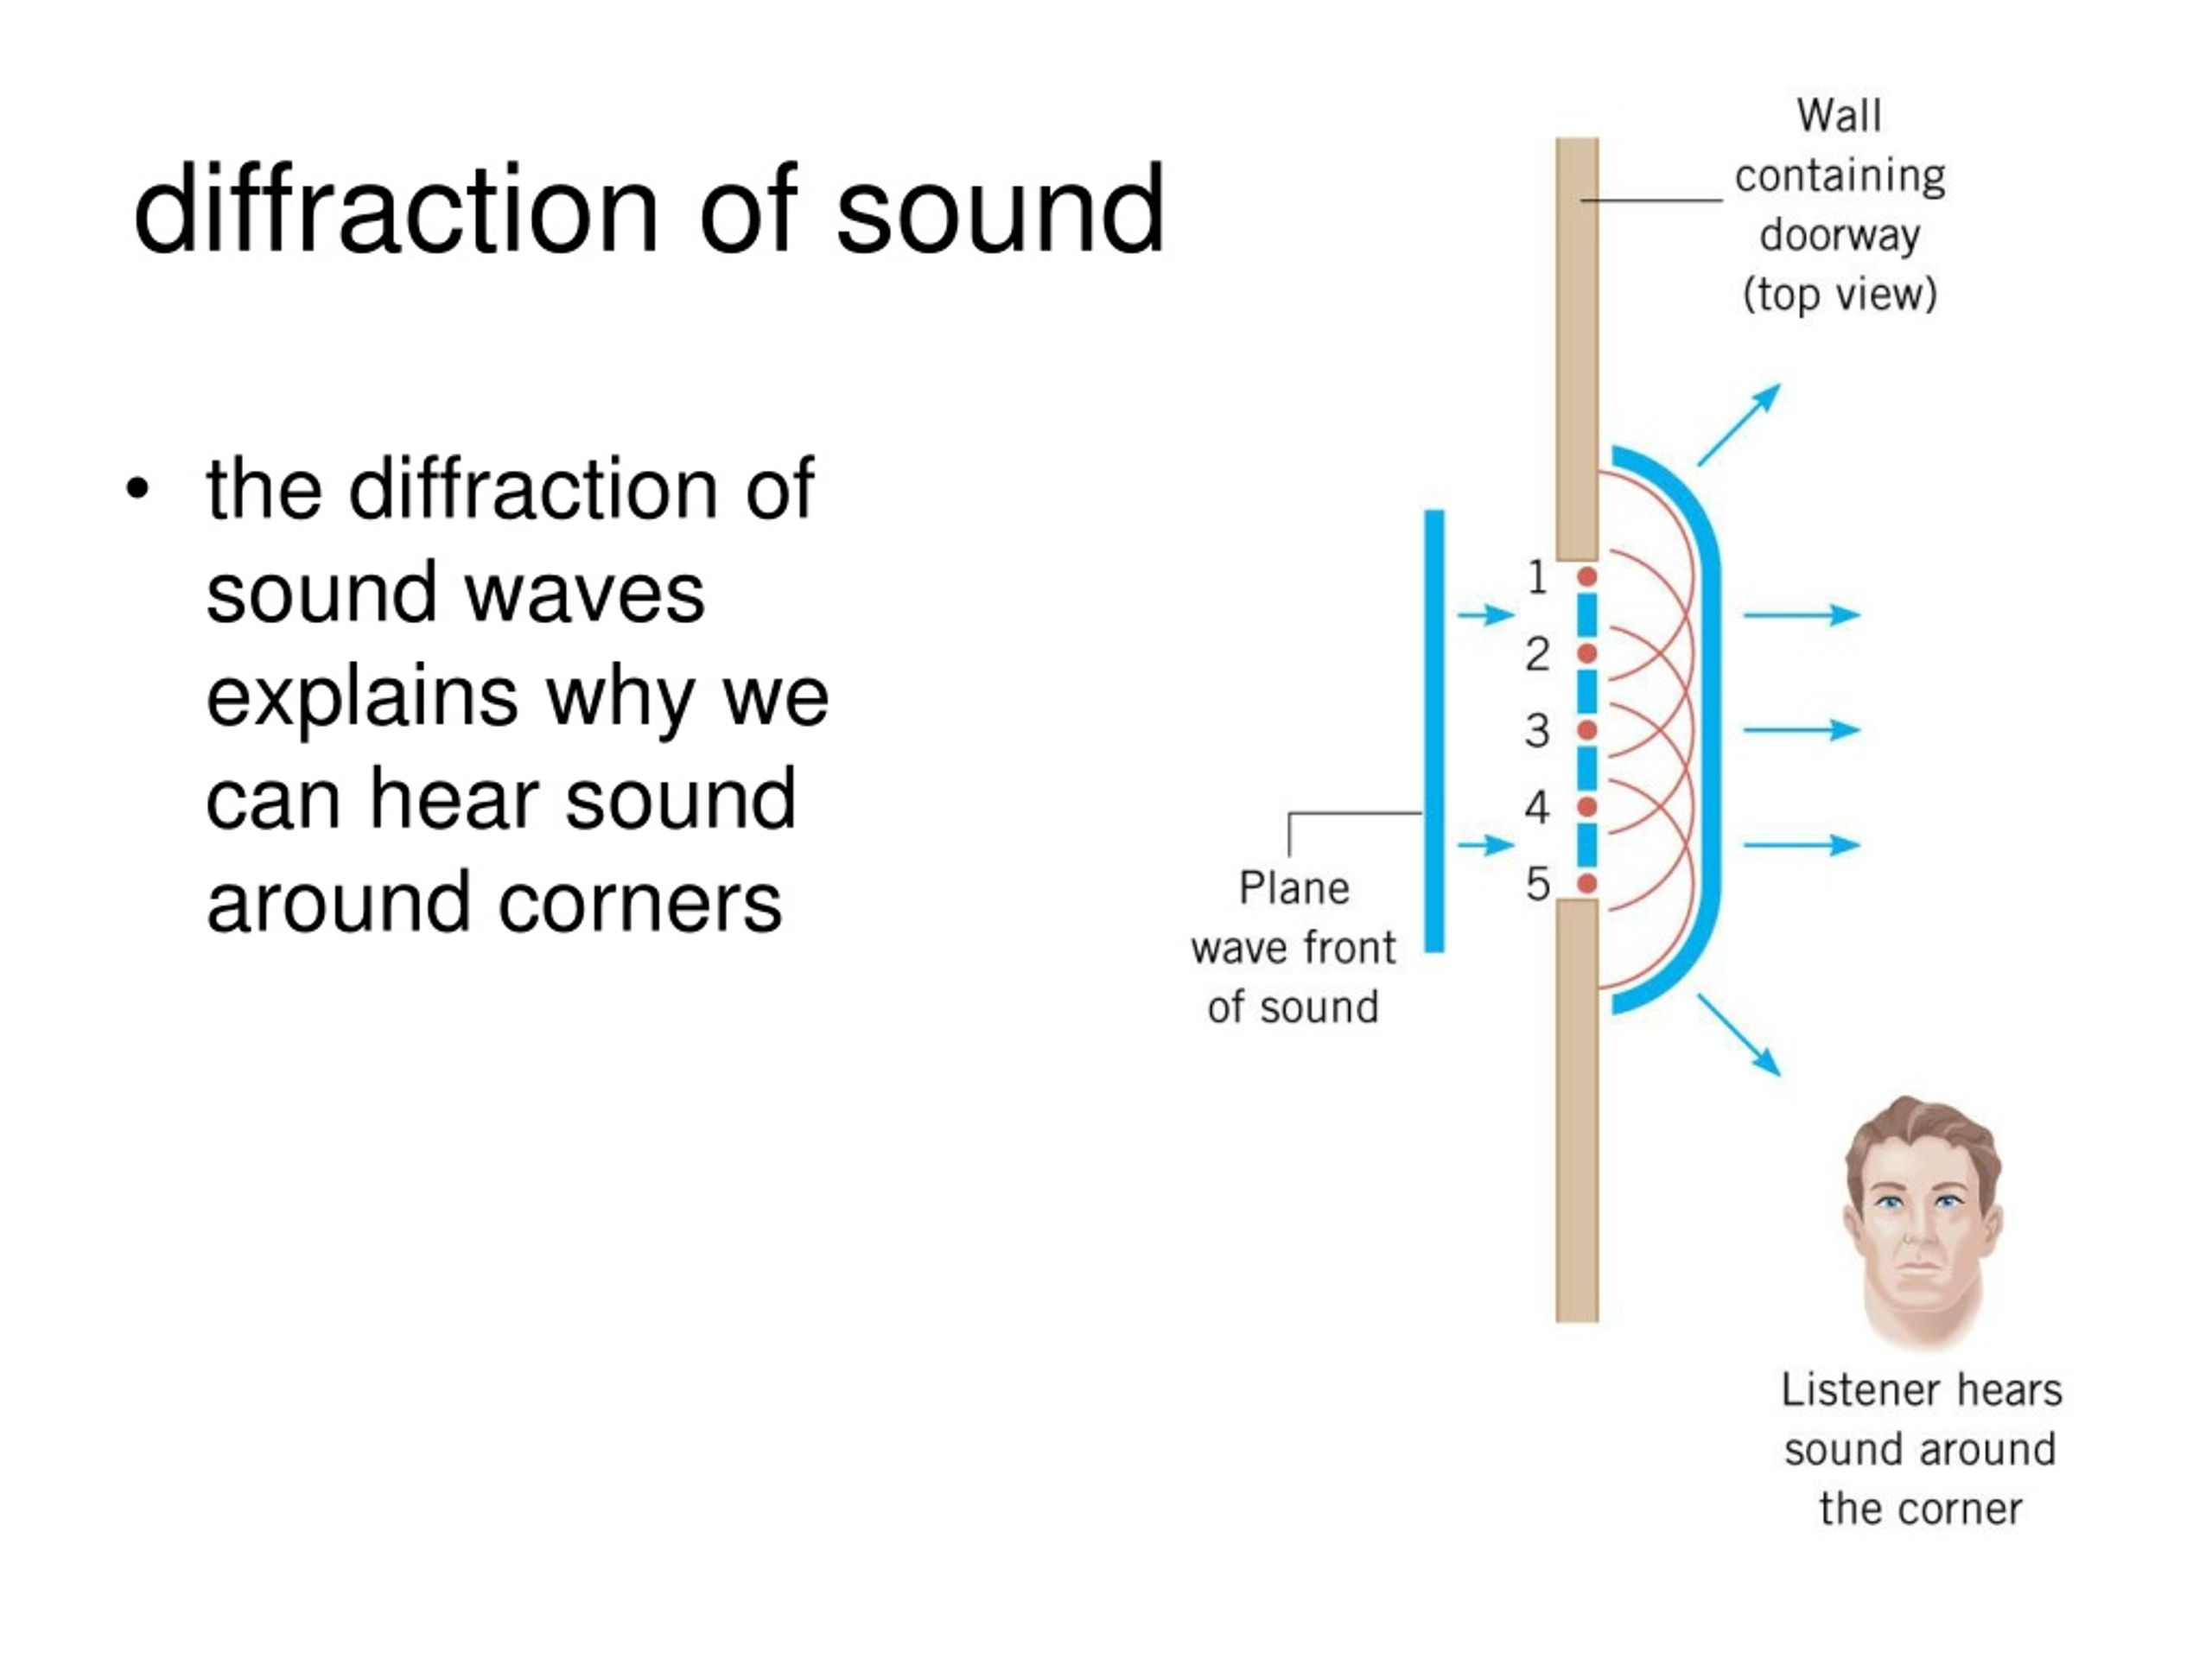 what happens when sound waves are diffracted